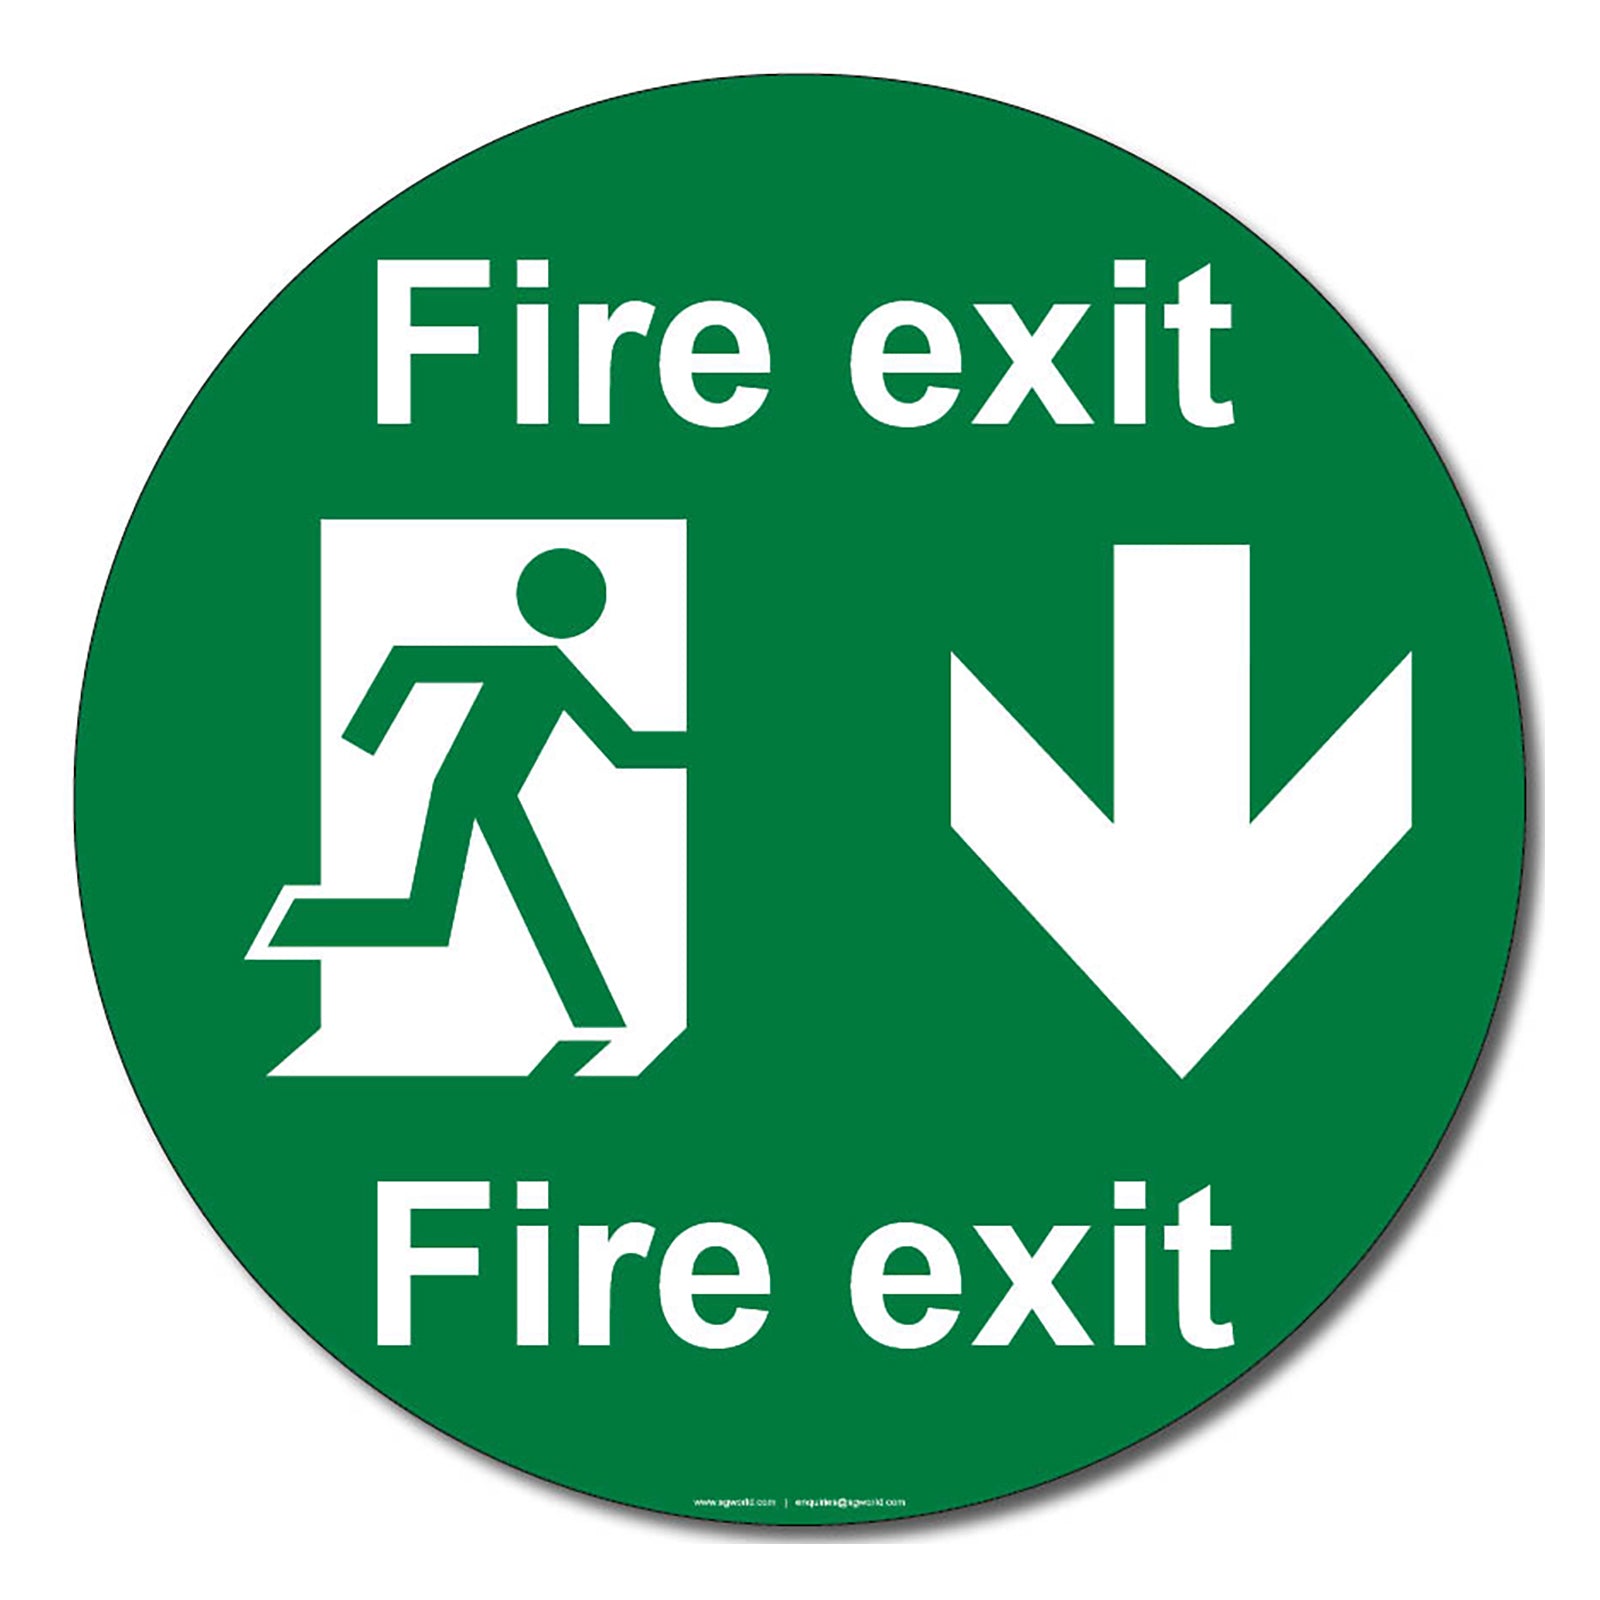 Fire Exit Running Man LEFT GREEN Sign Stickers health and safety 100x100mm  | eBay